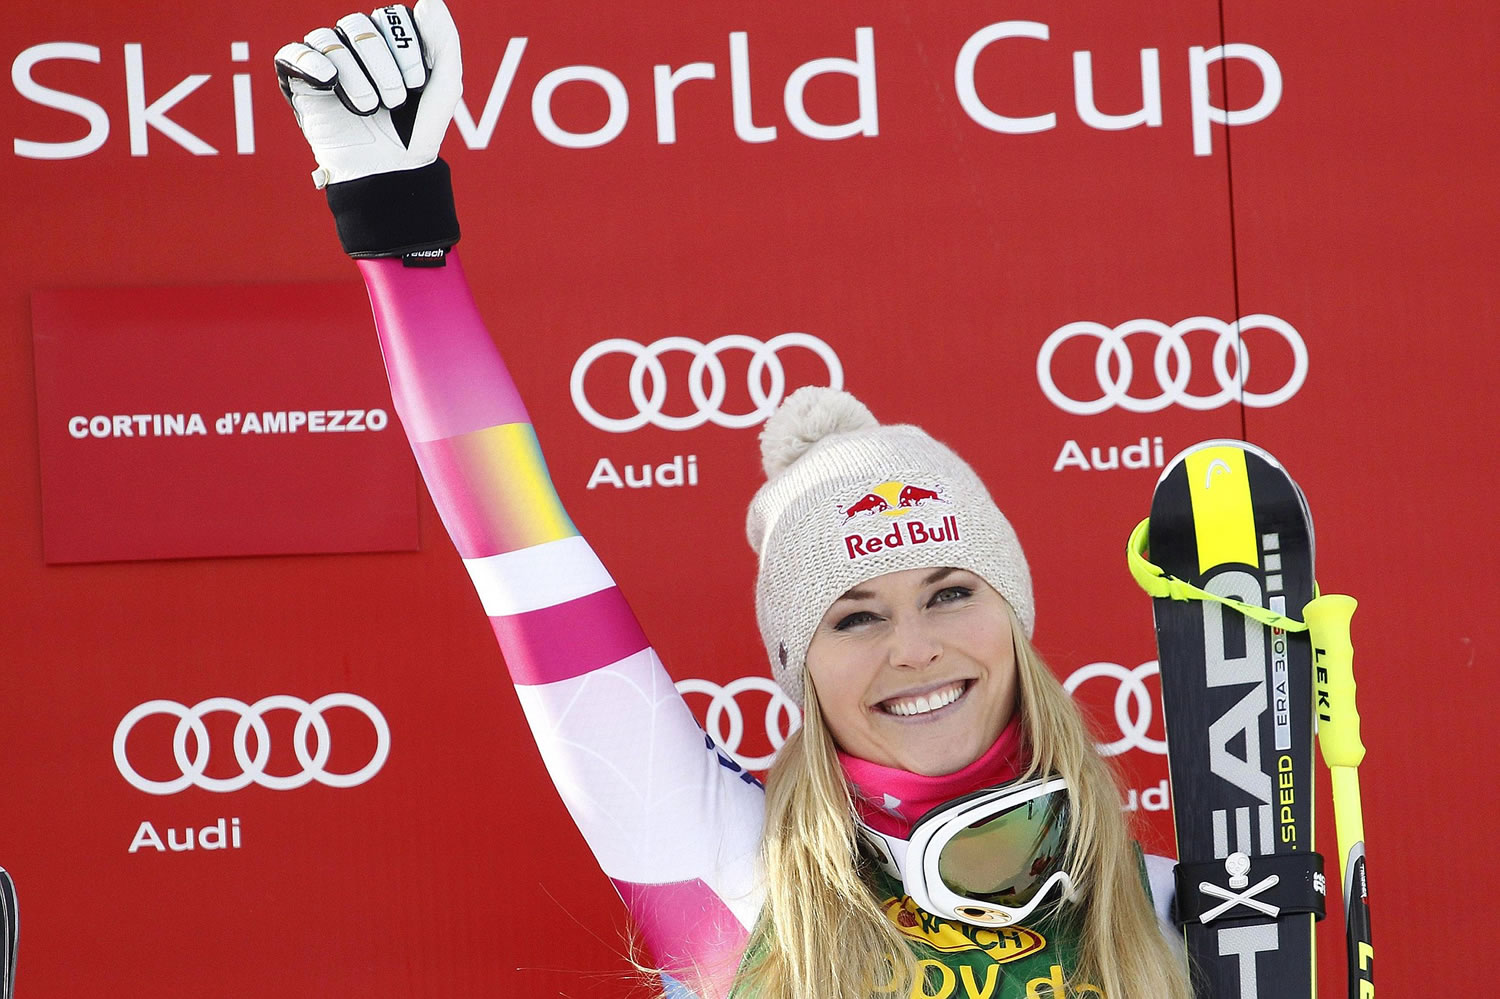 Lindsey Vonn celebrates on the podium after winning an alpine ski, women's World Cup super-G, in Cortina d'Ampezzo, Italy, Monday, Jan. 19, 2015. Lindsey Vonn won a super-G Monday for her record 63rd World Cup victory.